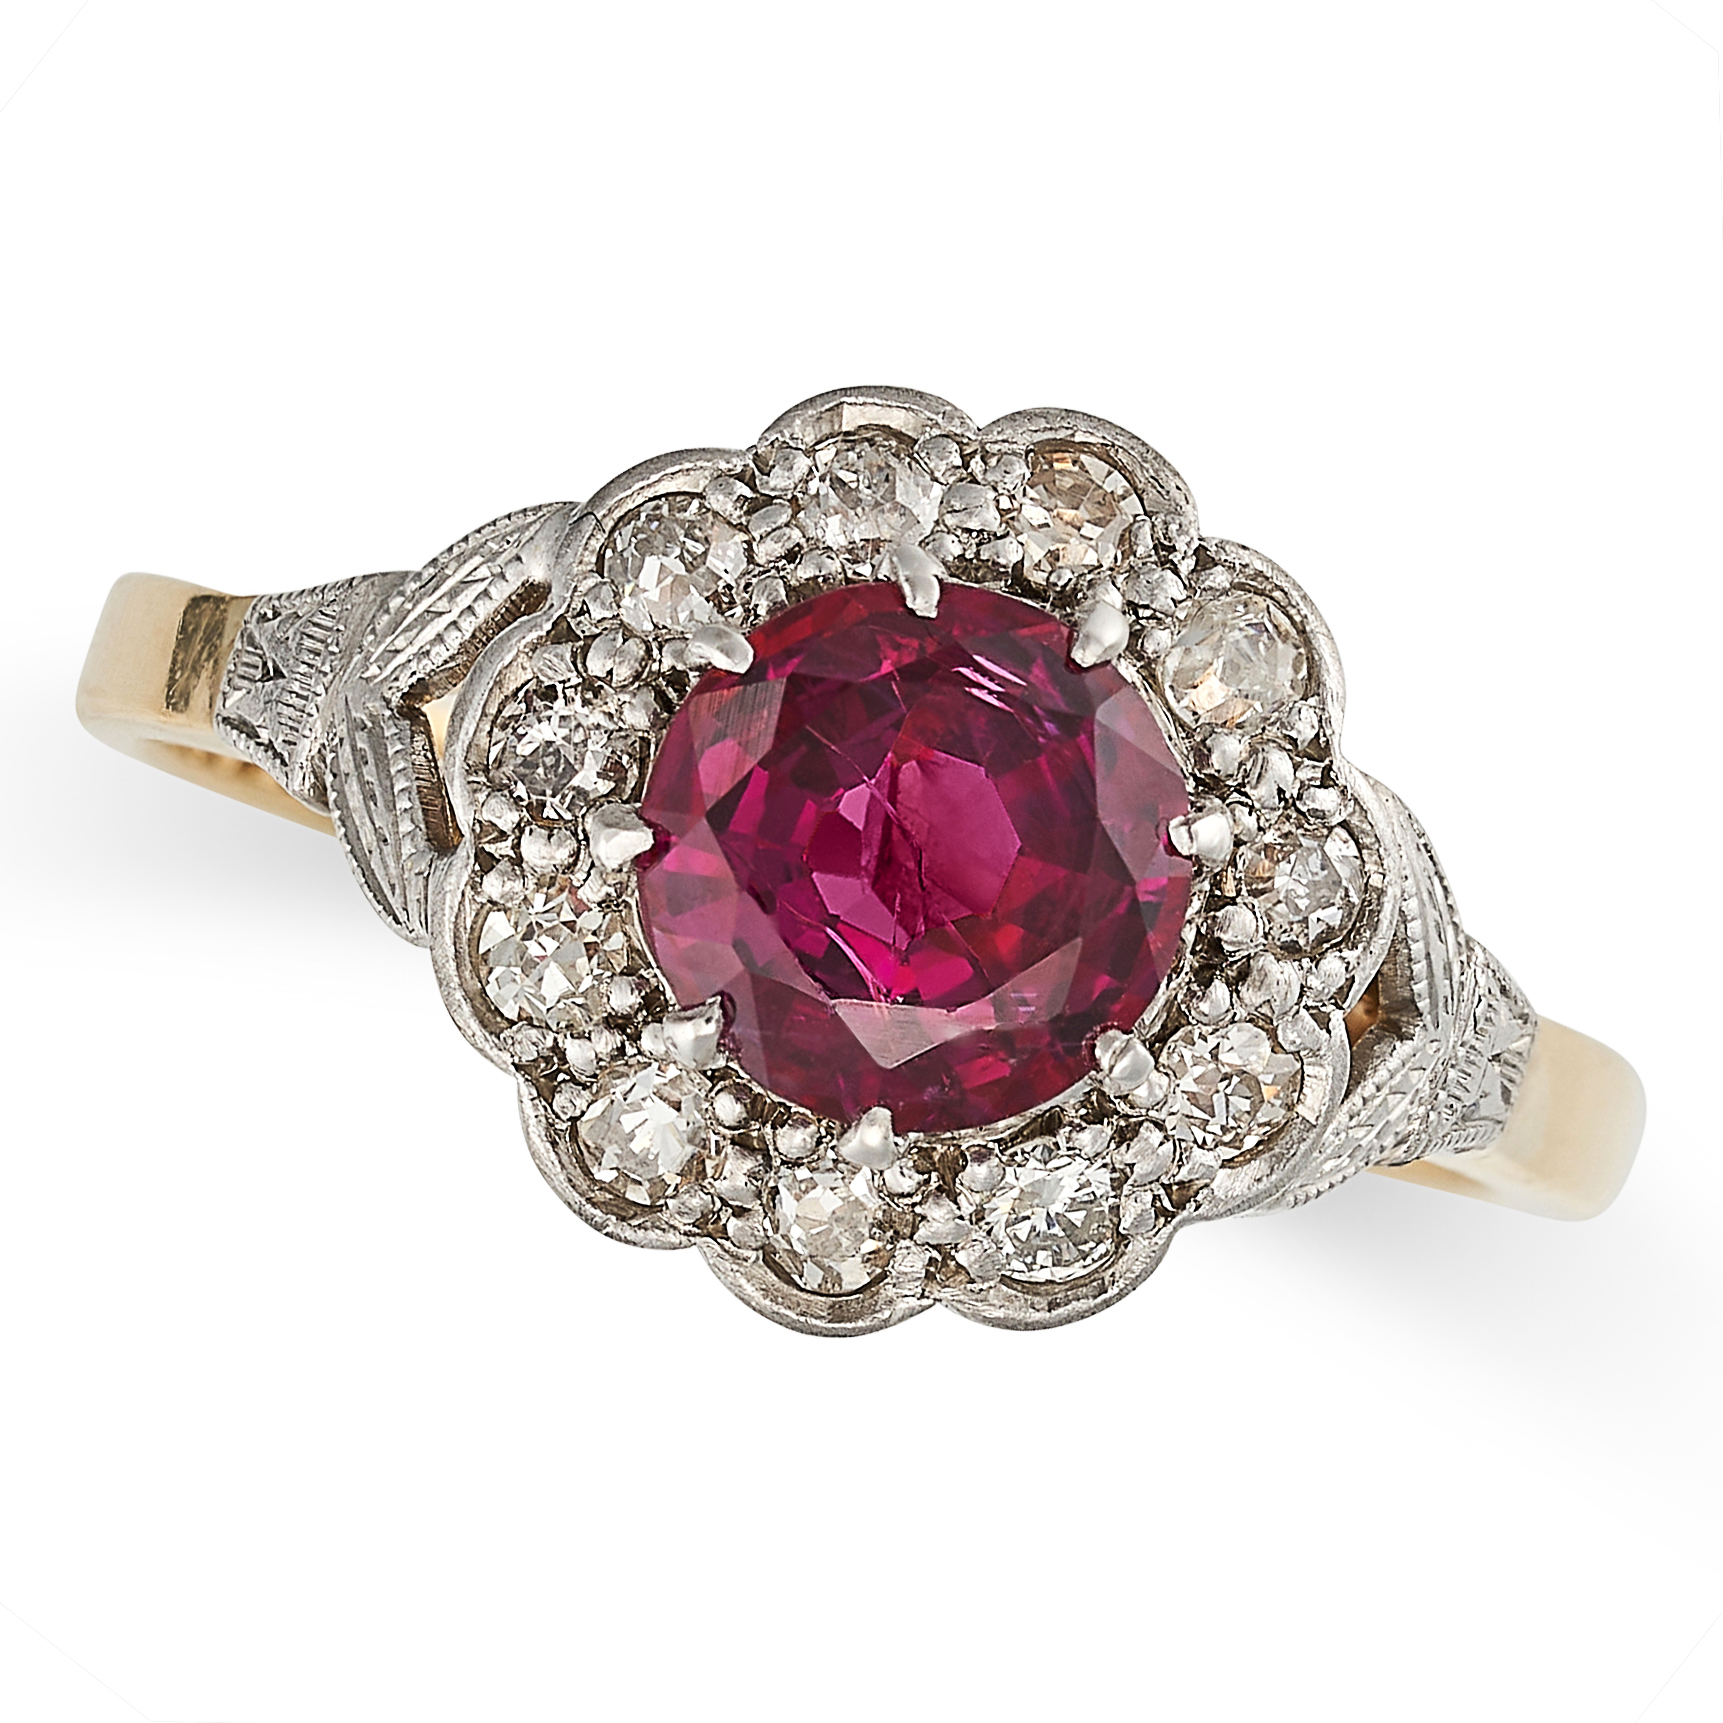 AN UNHEATED RUBY AND DIAMOND CLUSTER RING in 18ct yellow gold and platinum, set with a round cut